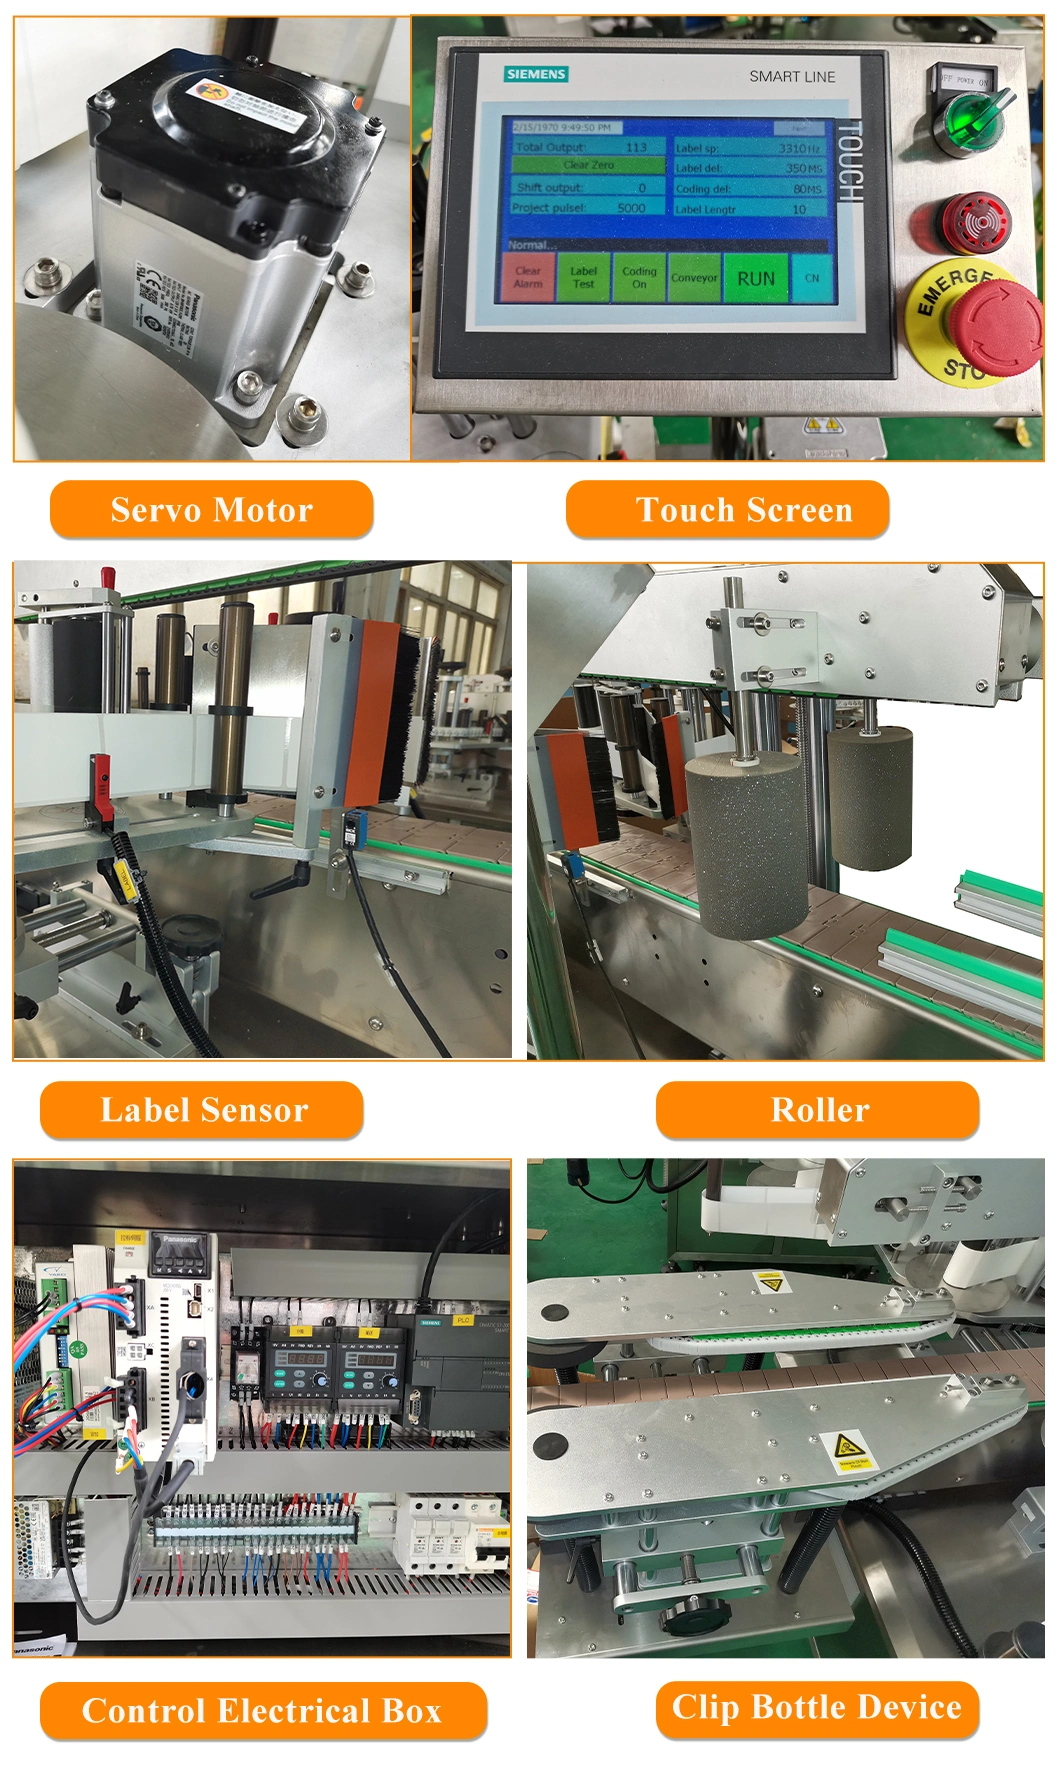 Shanghai Npack Factory Manufacturing Adhesive Label/Sticker Label Double Sides&Wrap Around Labeling Machine